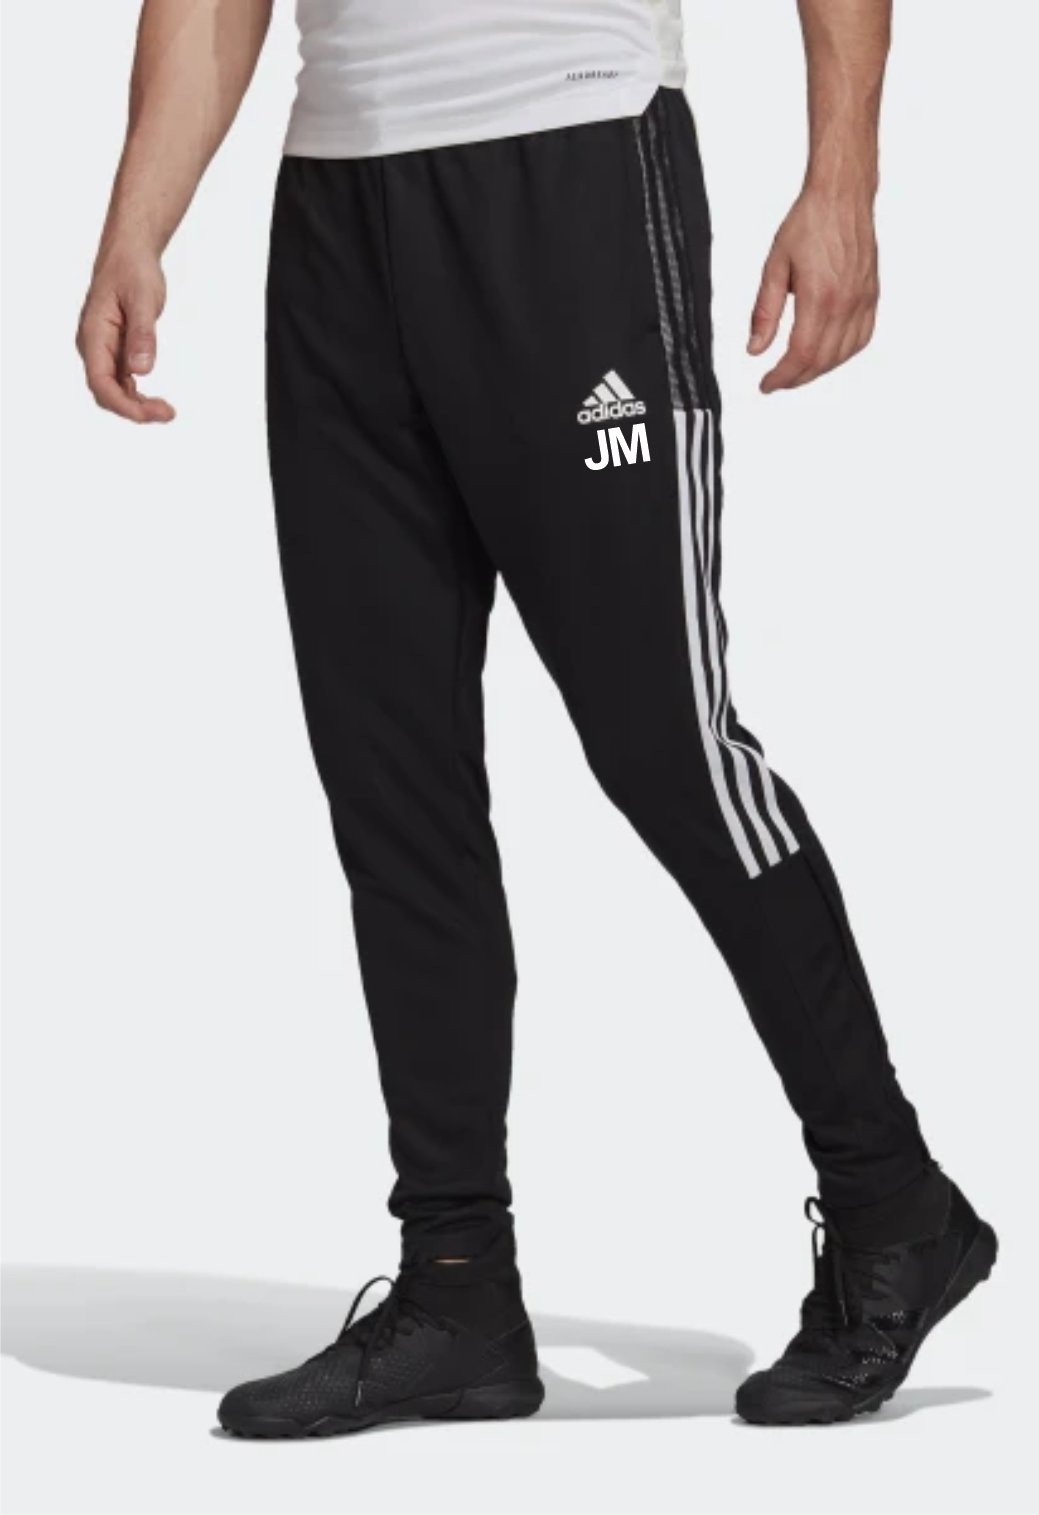 Adidas Tiro 21 Training Pant Specific) Soccer and Beyond